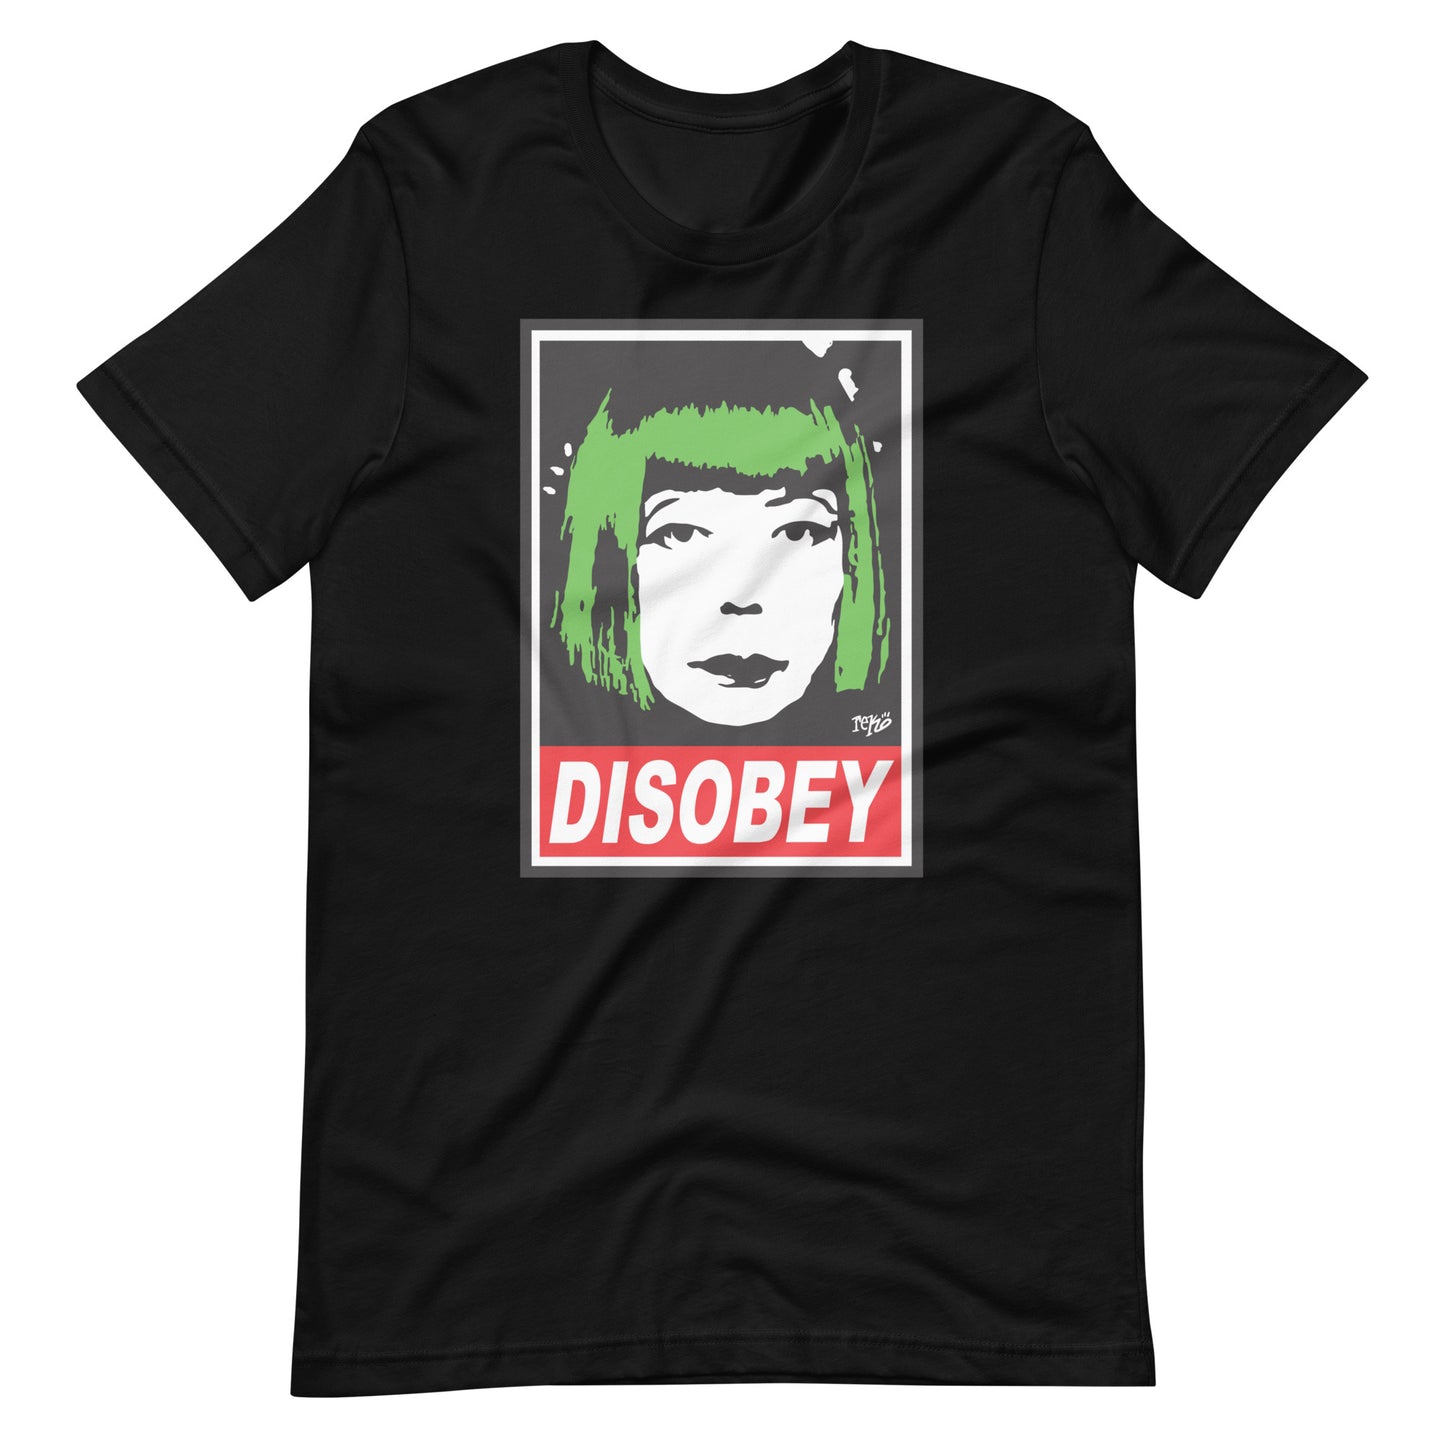 Disobey Green T-shirt